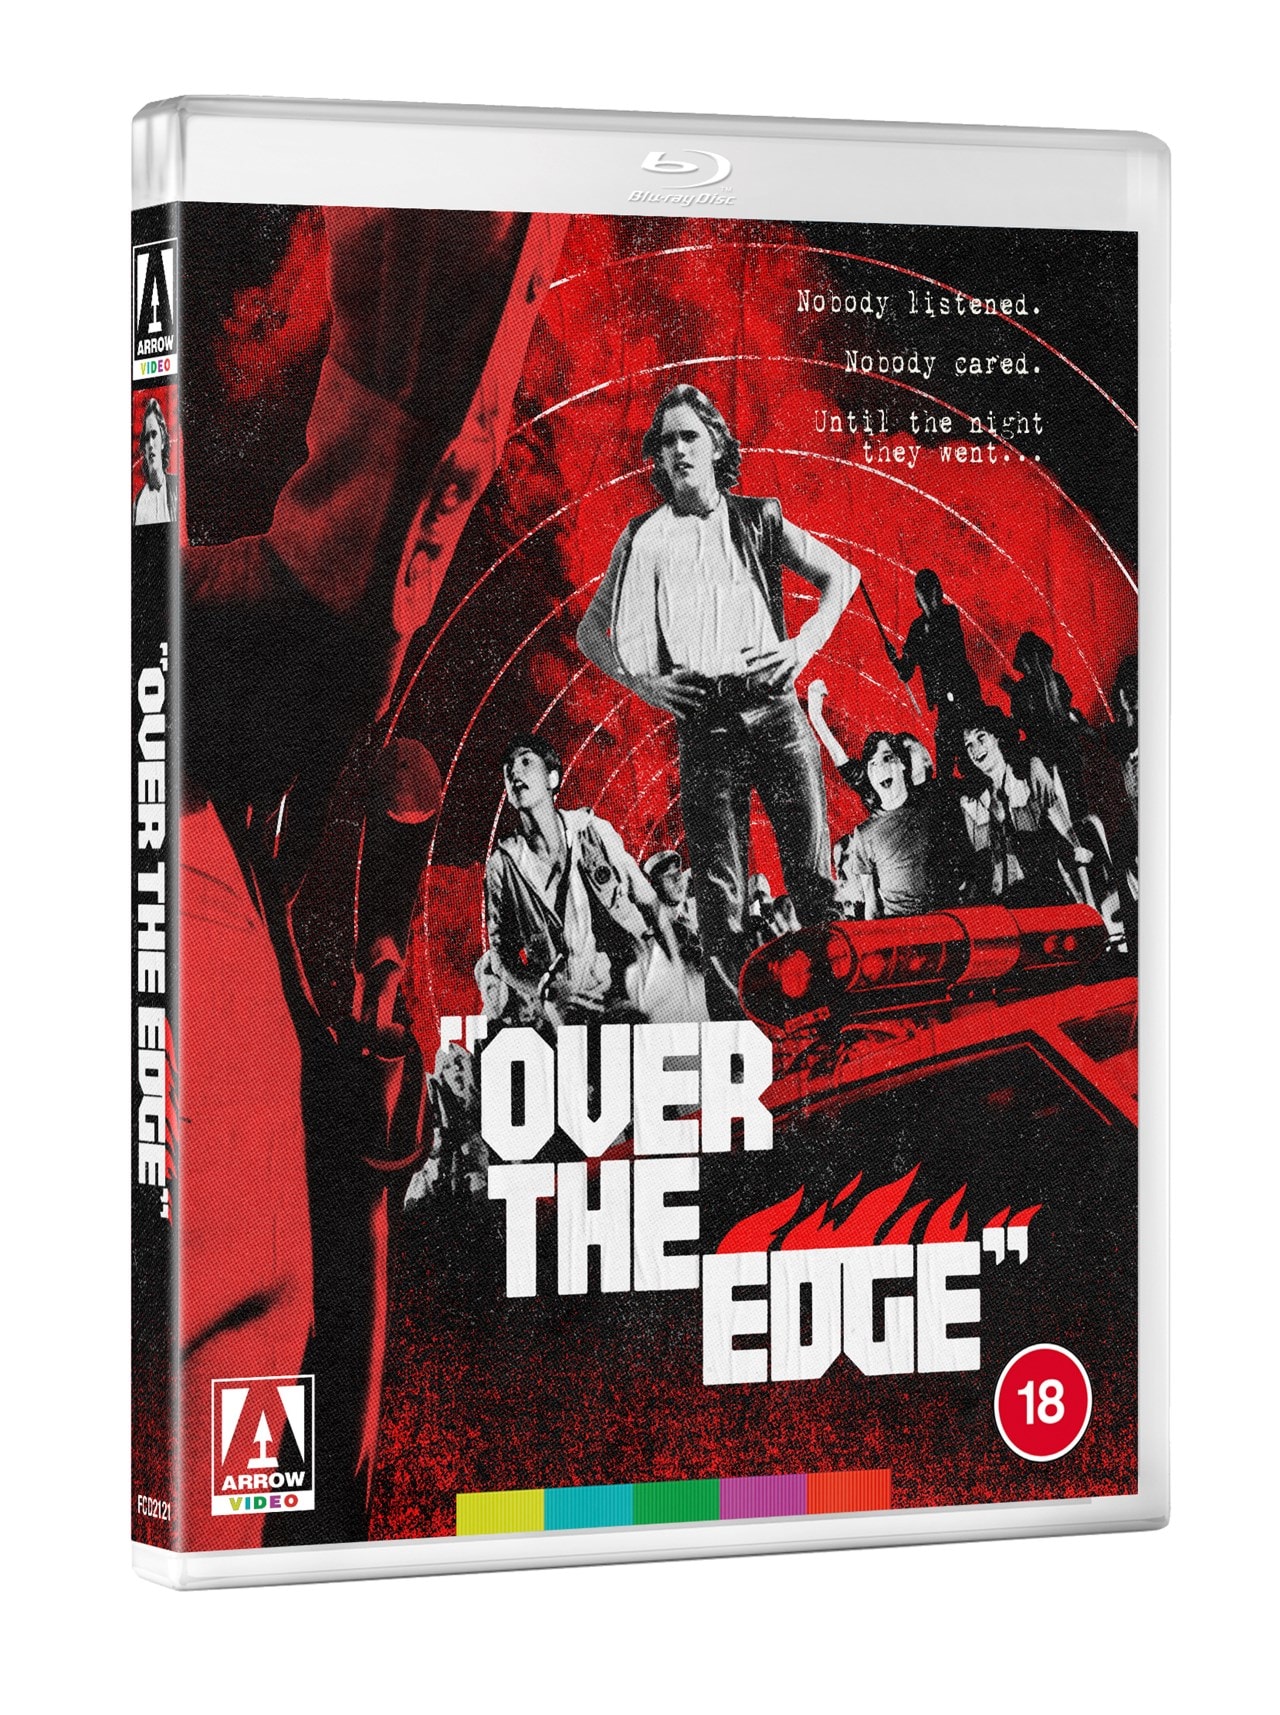 Over the Edge | Blu-ray | Free shipping over £20 | HMV Store